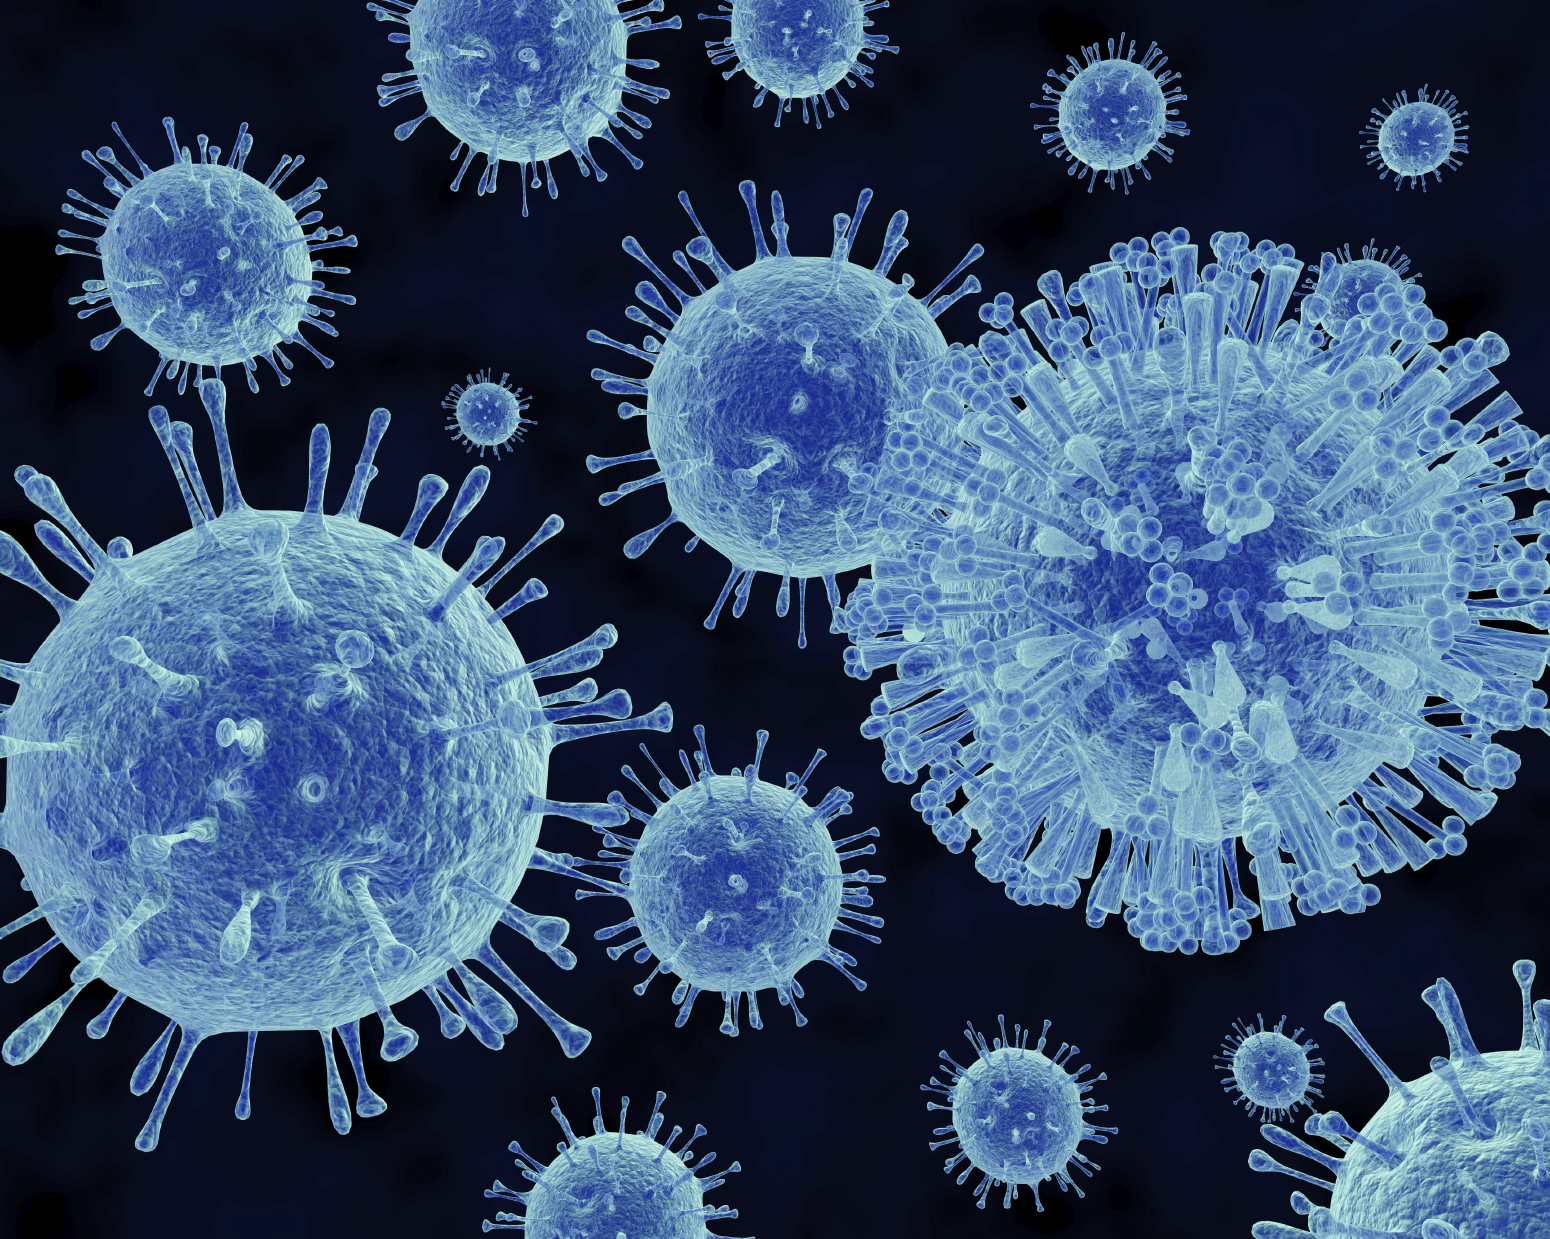 Immunocore&#039;s T-cell therapy could provide HIV cure